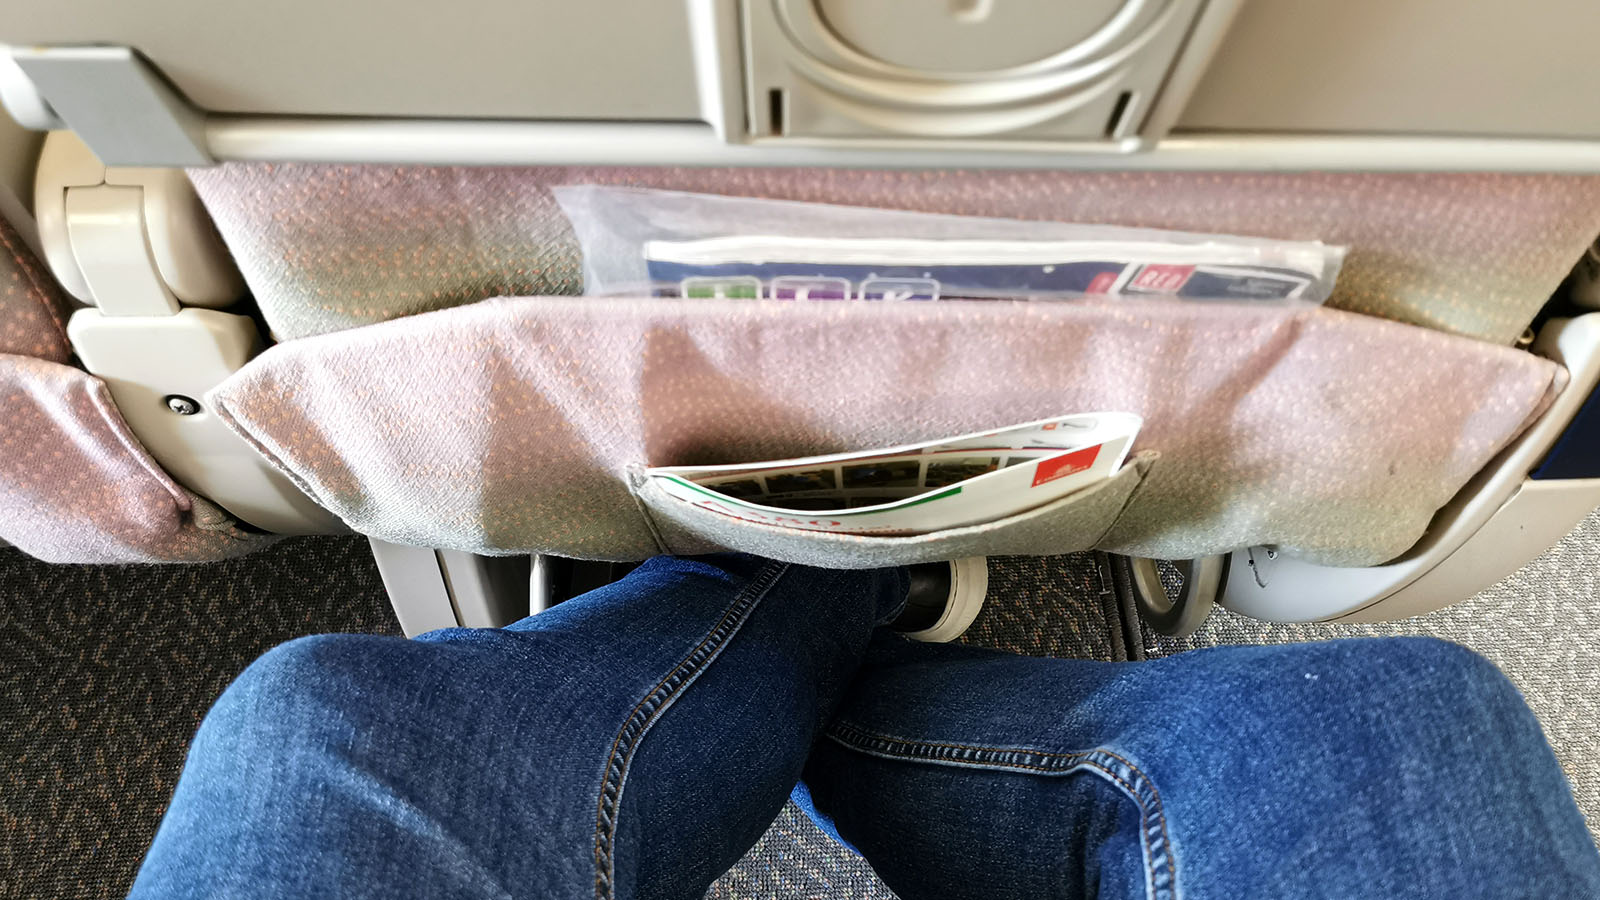 Feet can fit in Emirates Airbus A380 Economy